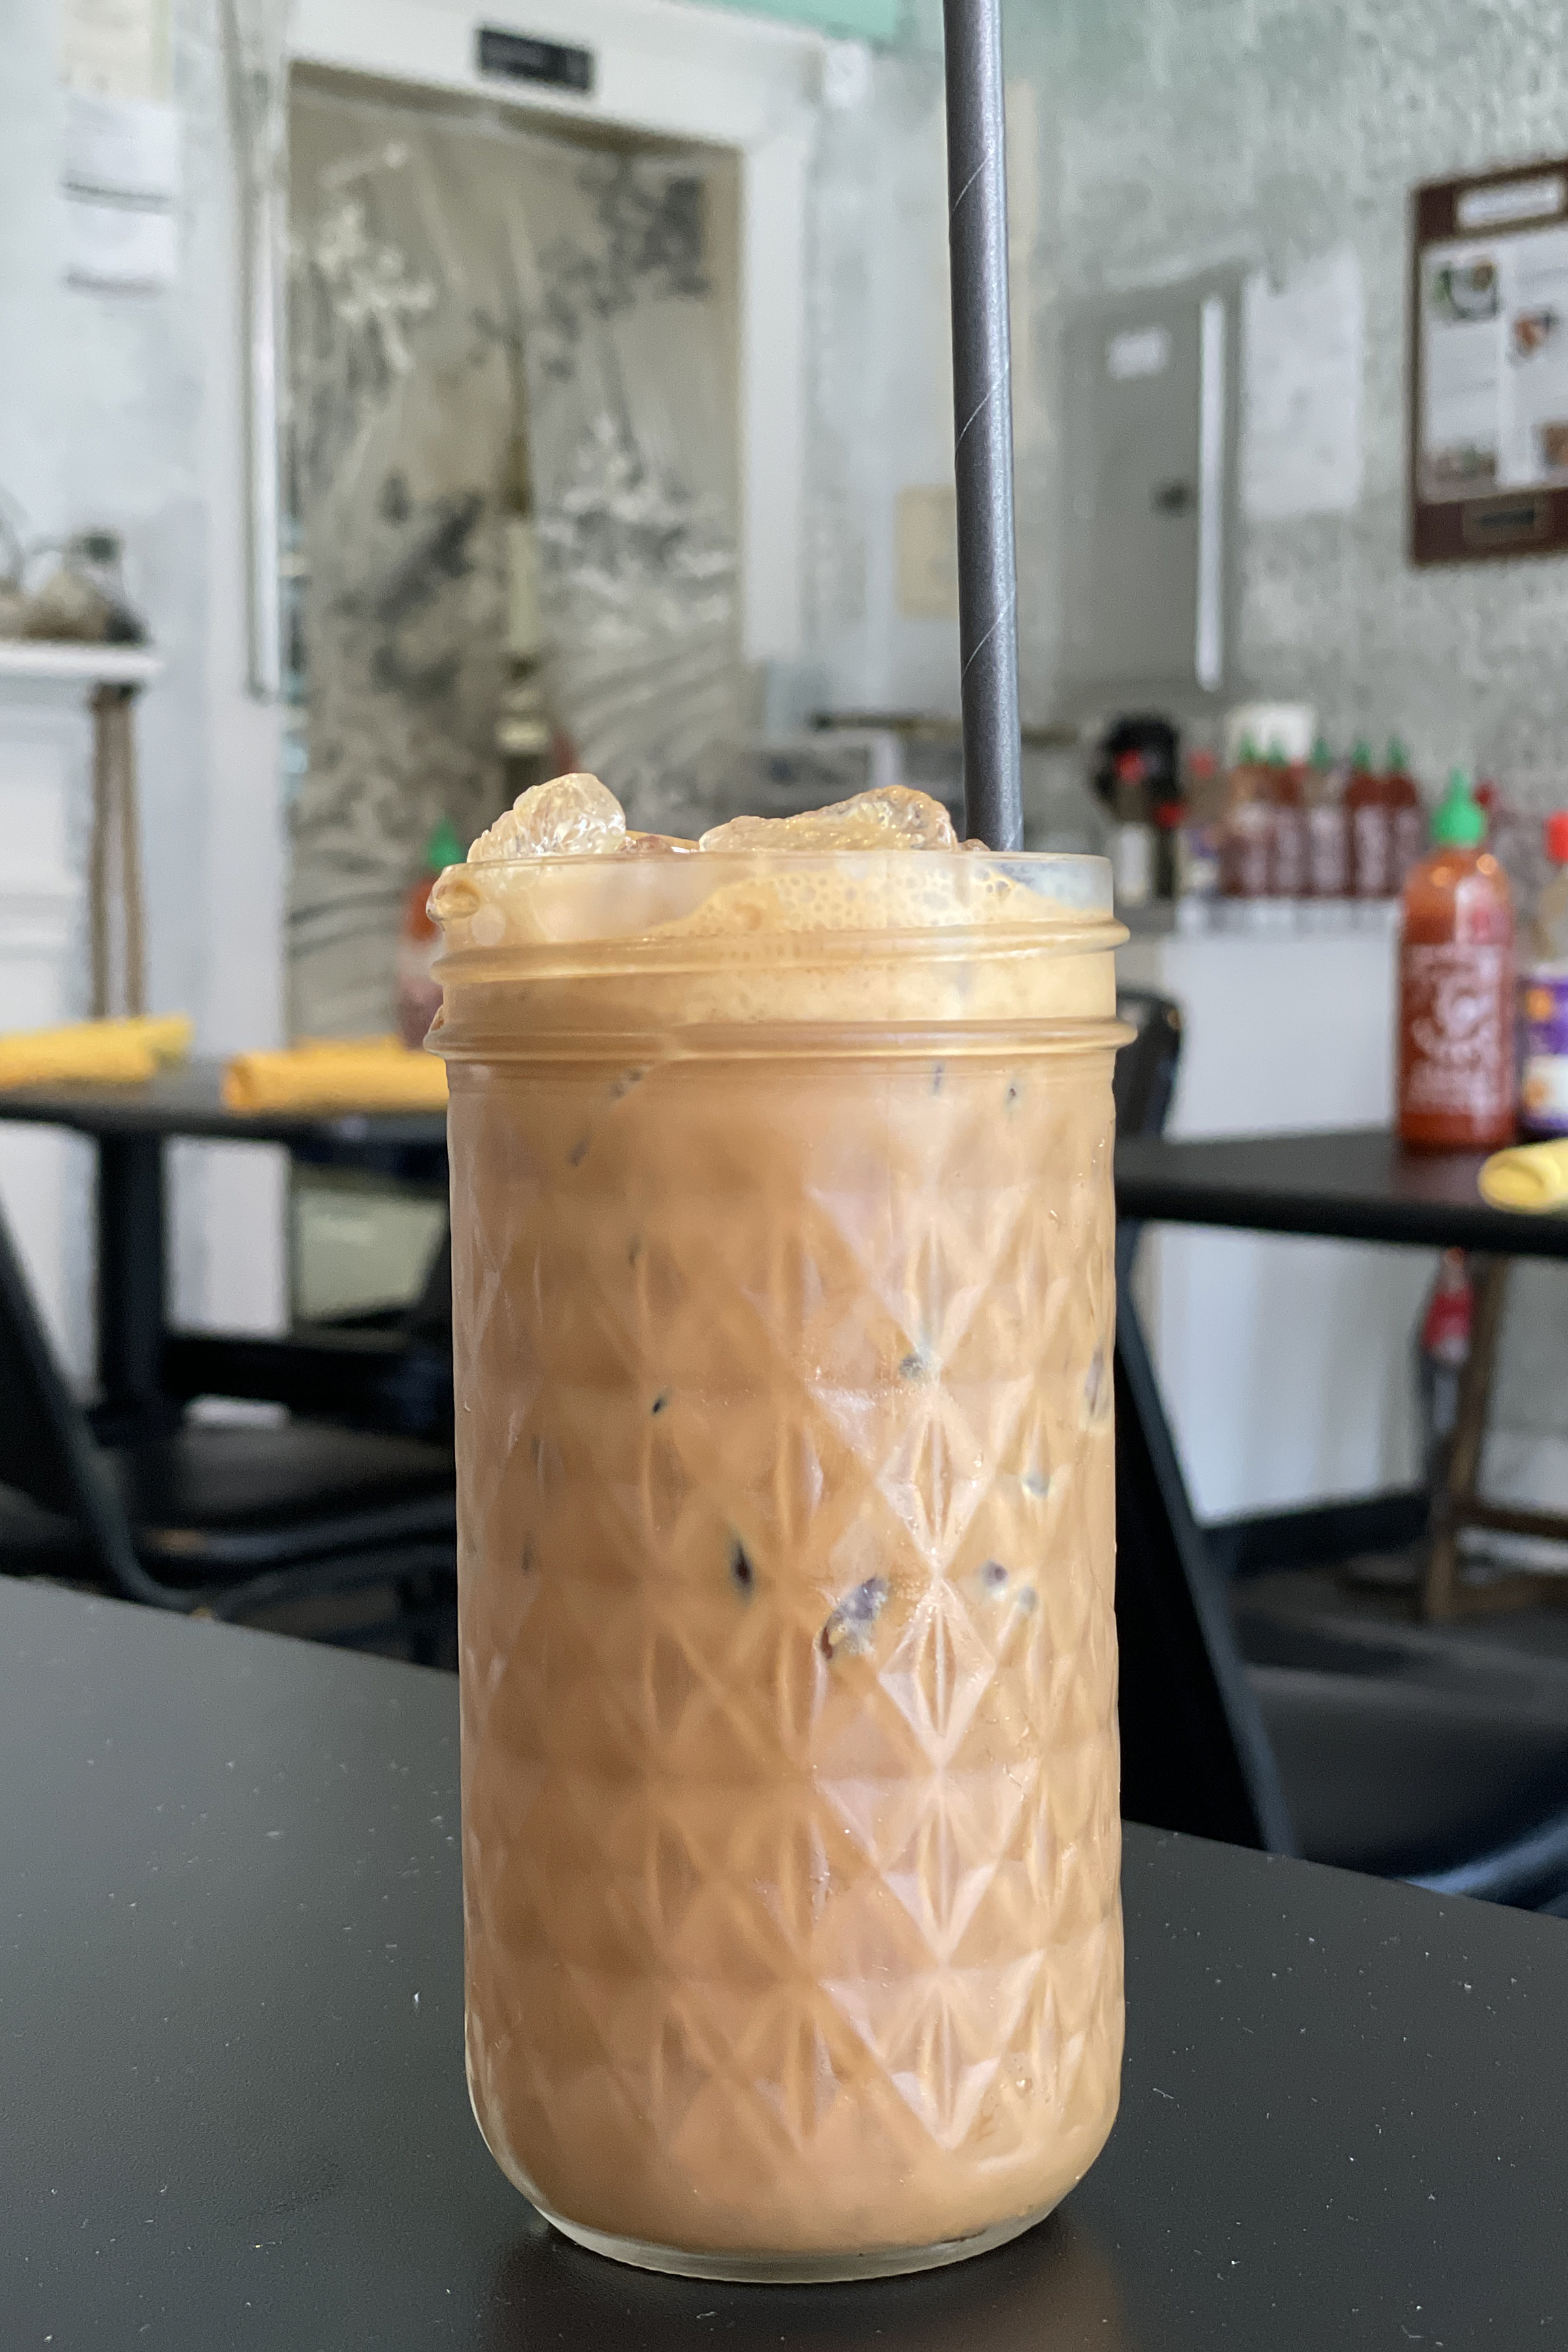 Drink dessert first! Sweet and rich, Vietnamese iced coffee makes a splendid antidote for fiery fare.